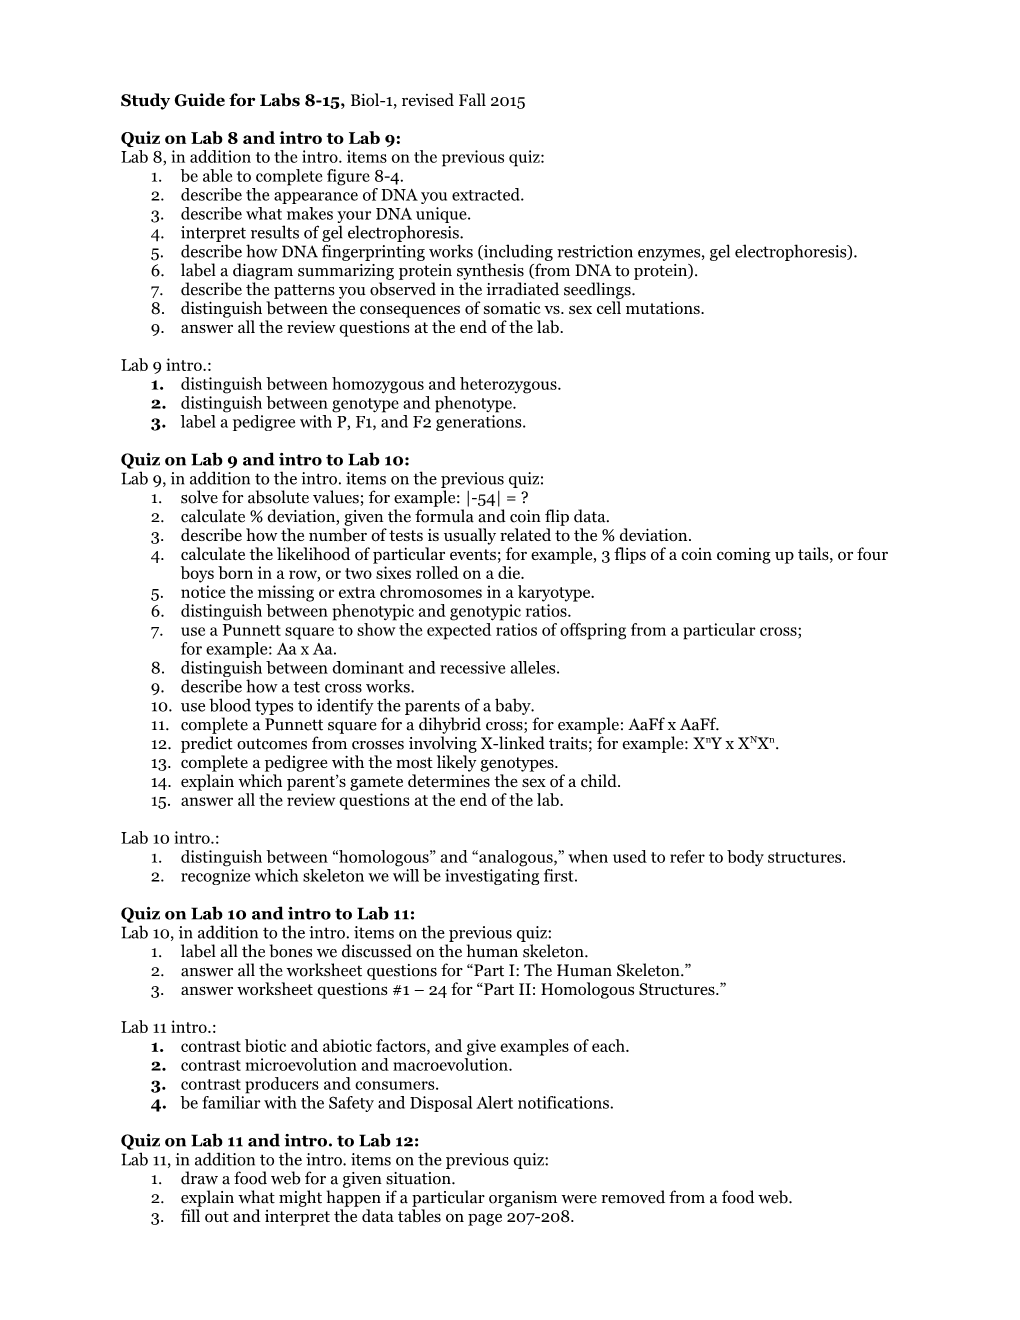 Study Guide for Labs 8-15, Biol-1, Revised Fall 2015